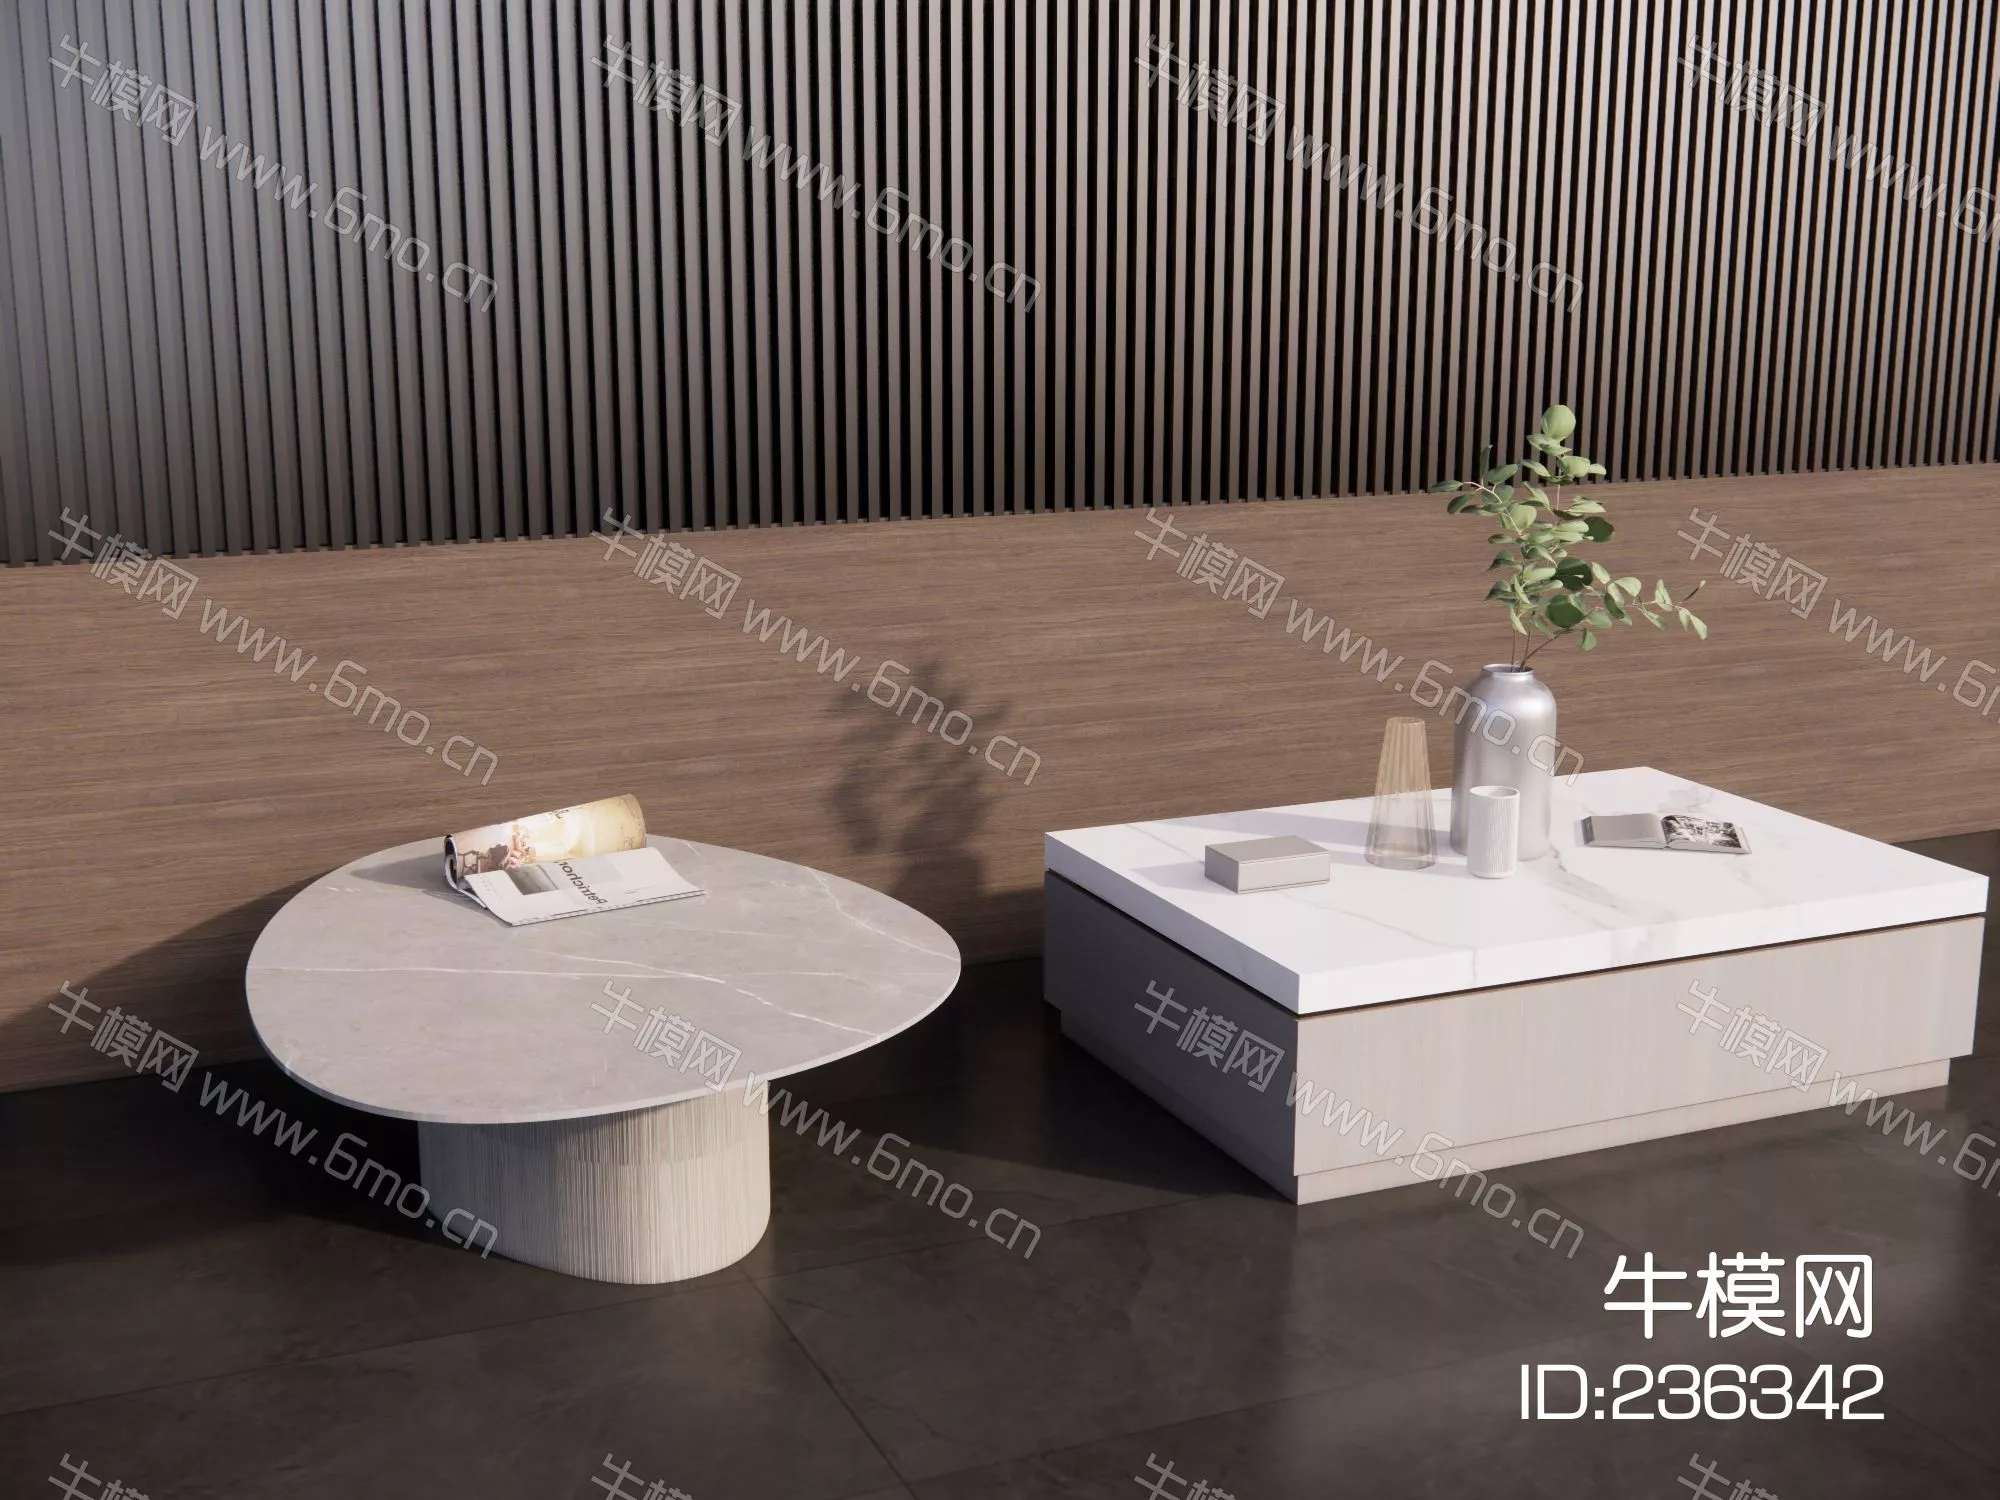 MODERN COFFEE TABLE - SKETCHUP 3D MODEL - ENSCAPE - 236342